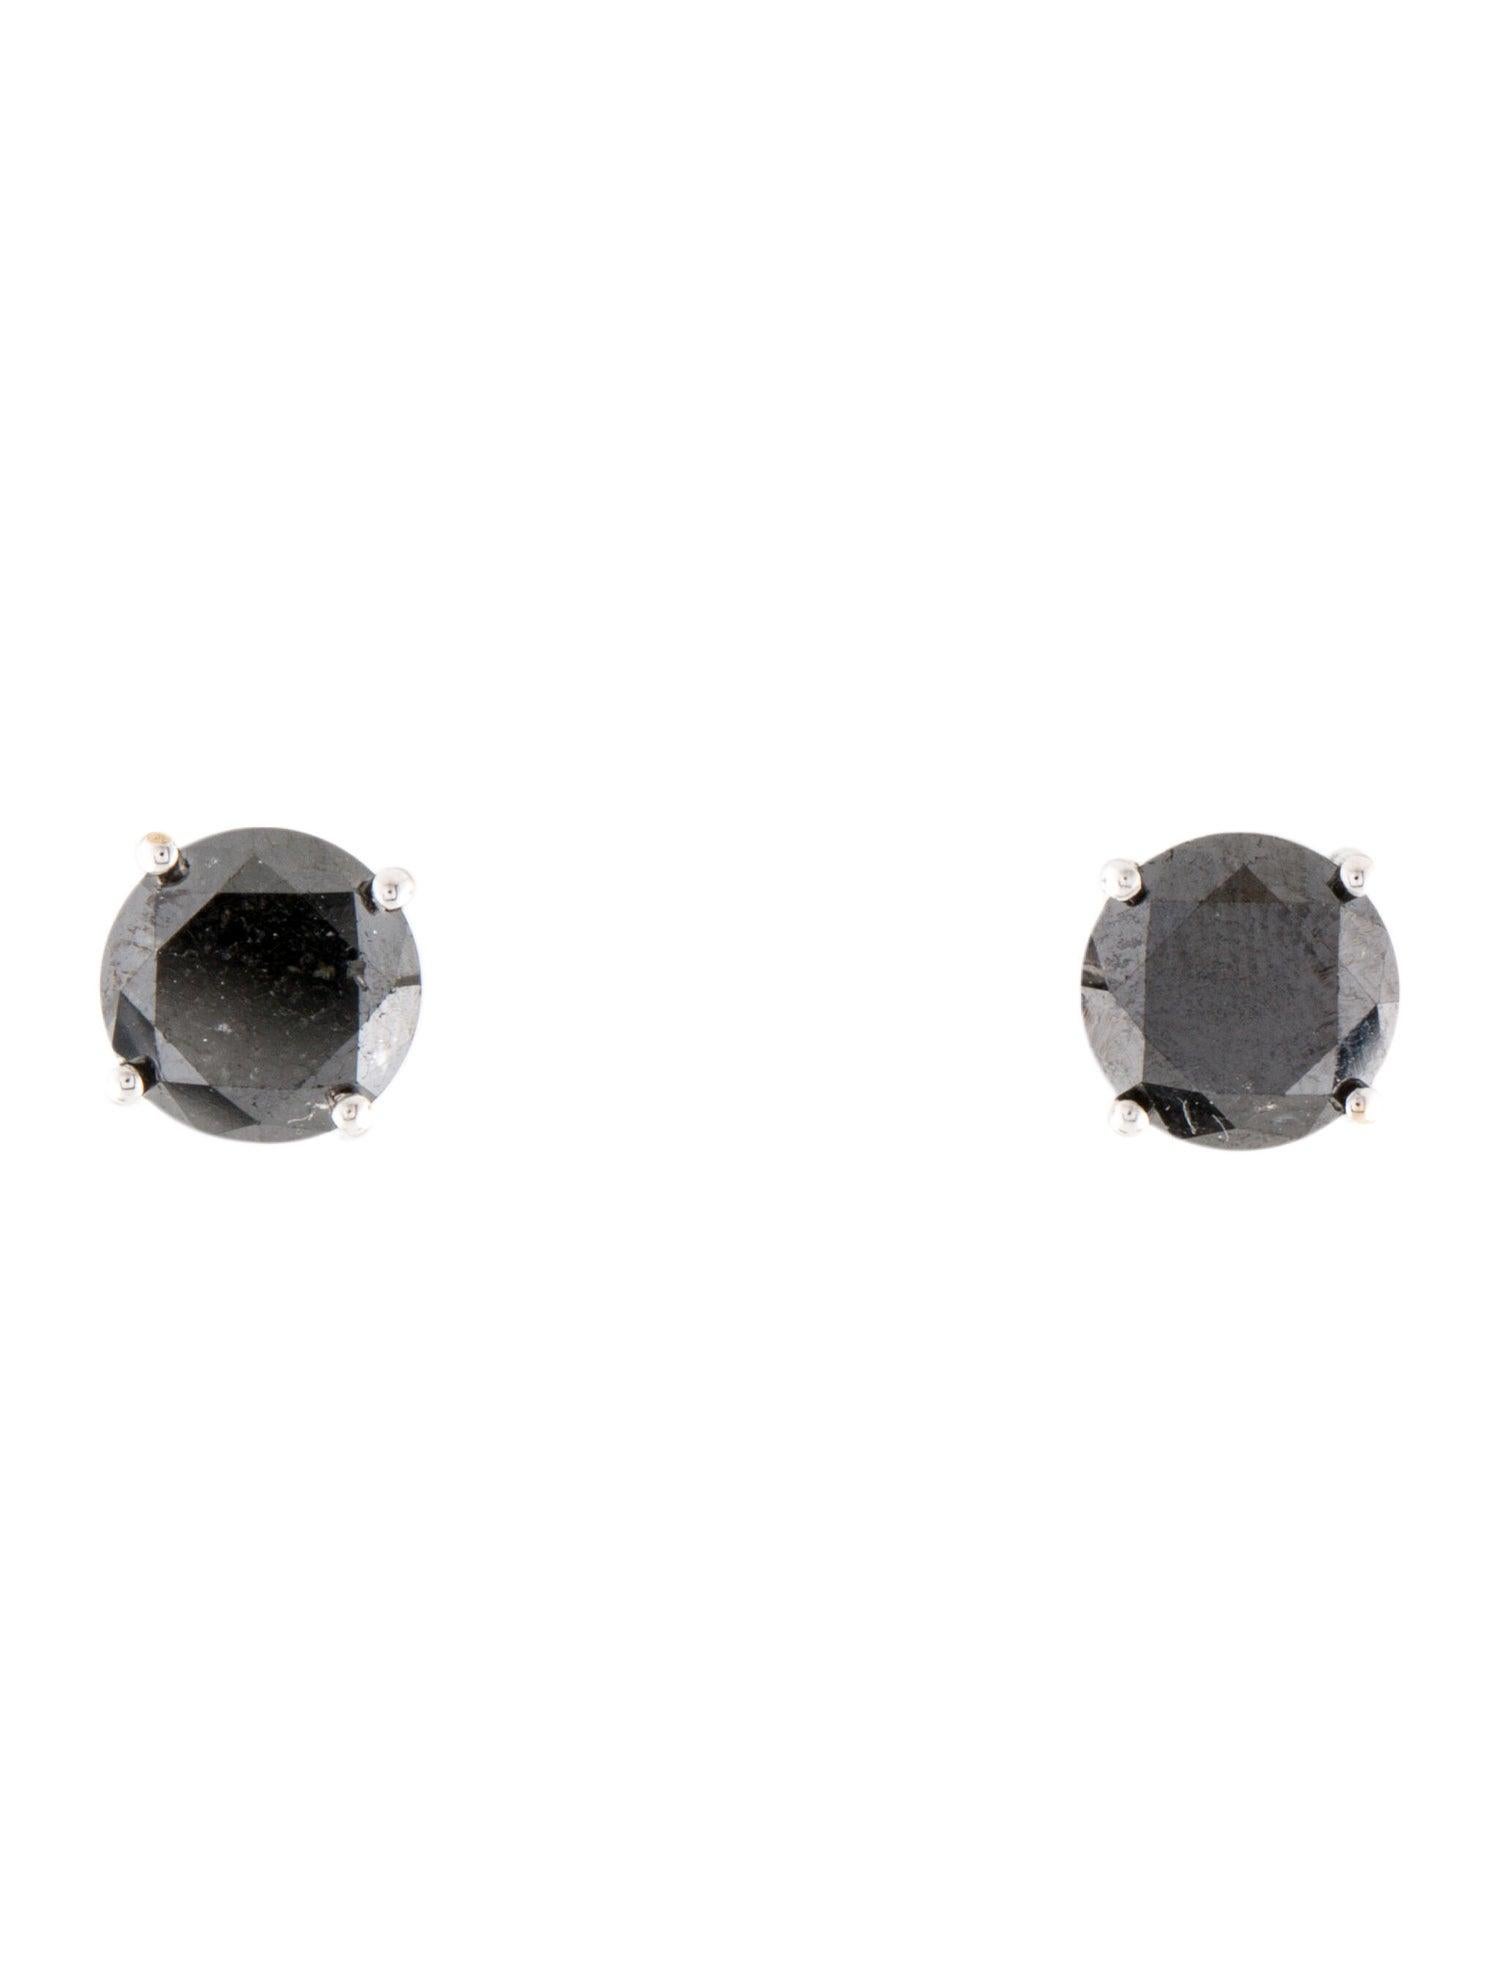 Elevate your jewelry collection with our striking 14K White Gold Black Diamond Stud Earrings, featuring a total carat weight of 3.25ctw. These earrings showcase two magnificent round brilliant black diamonds, color enhanced to draw attention and